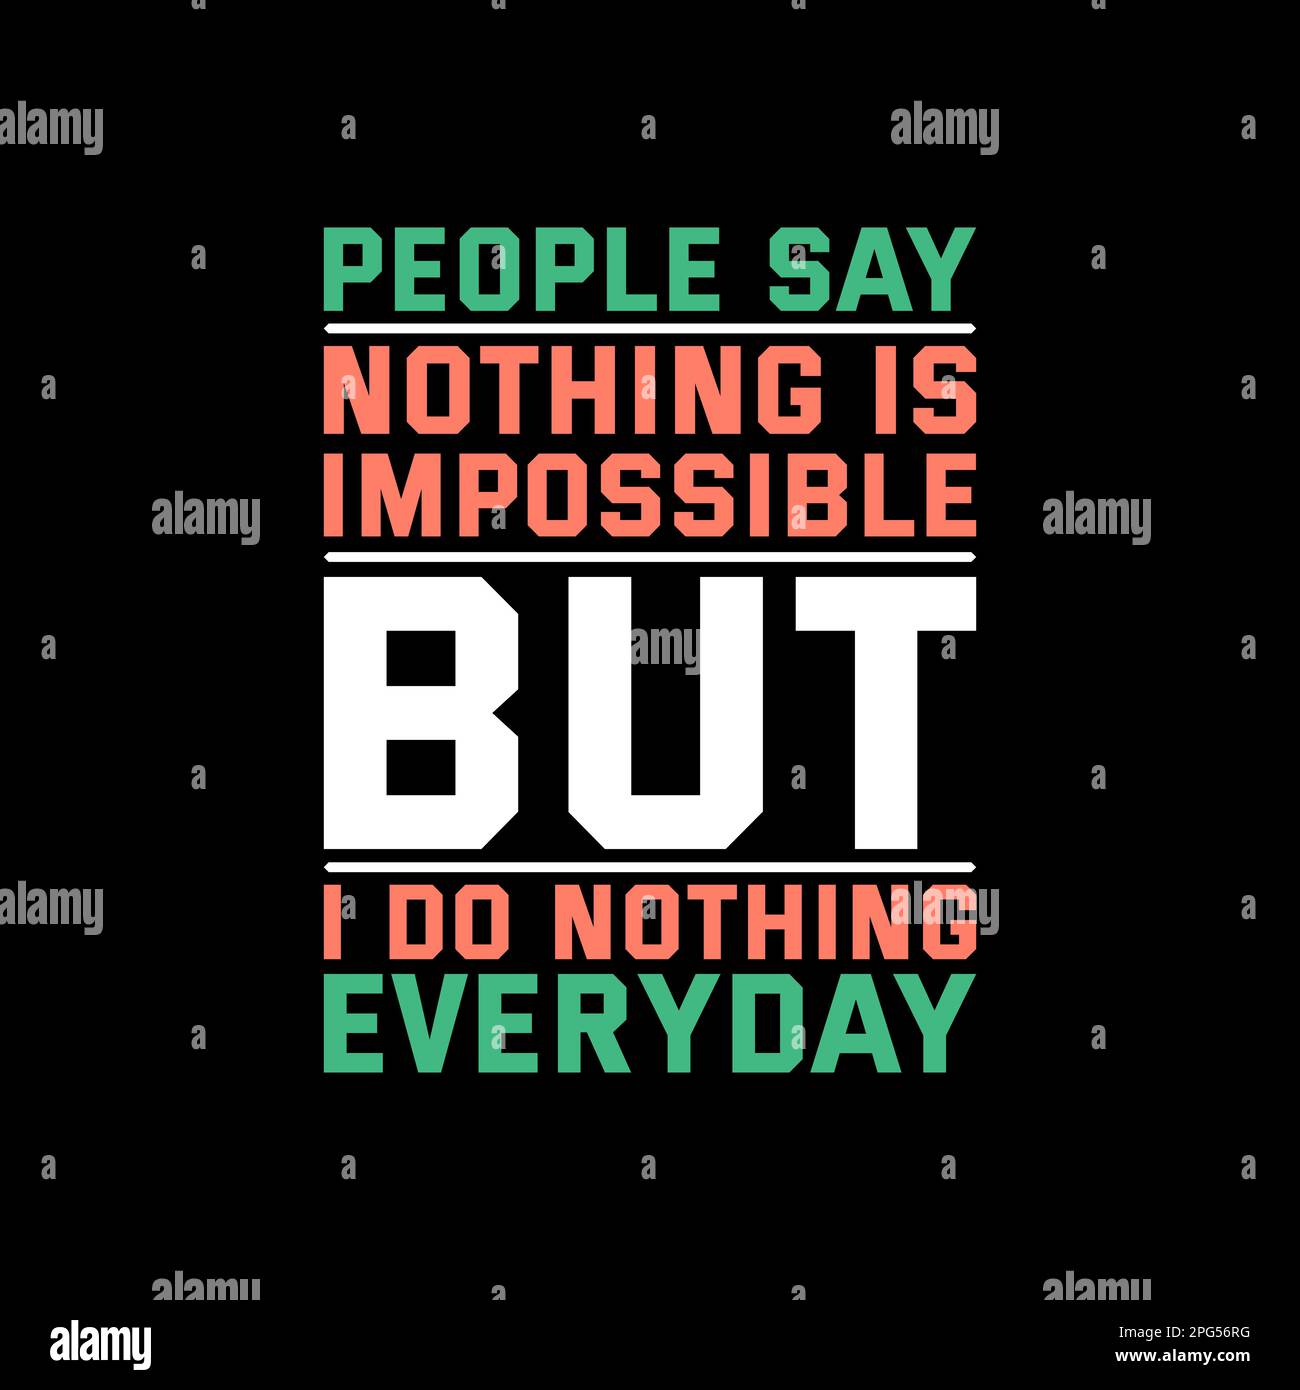 People Say Nothing is Impossible but I Do Nothing Everyday, Funny Typography Quote Design for T-Shirt, Mug, Poster or Other Merchandise. Stock Vector